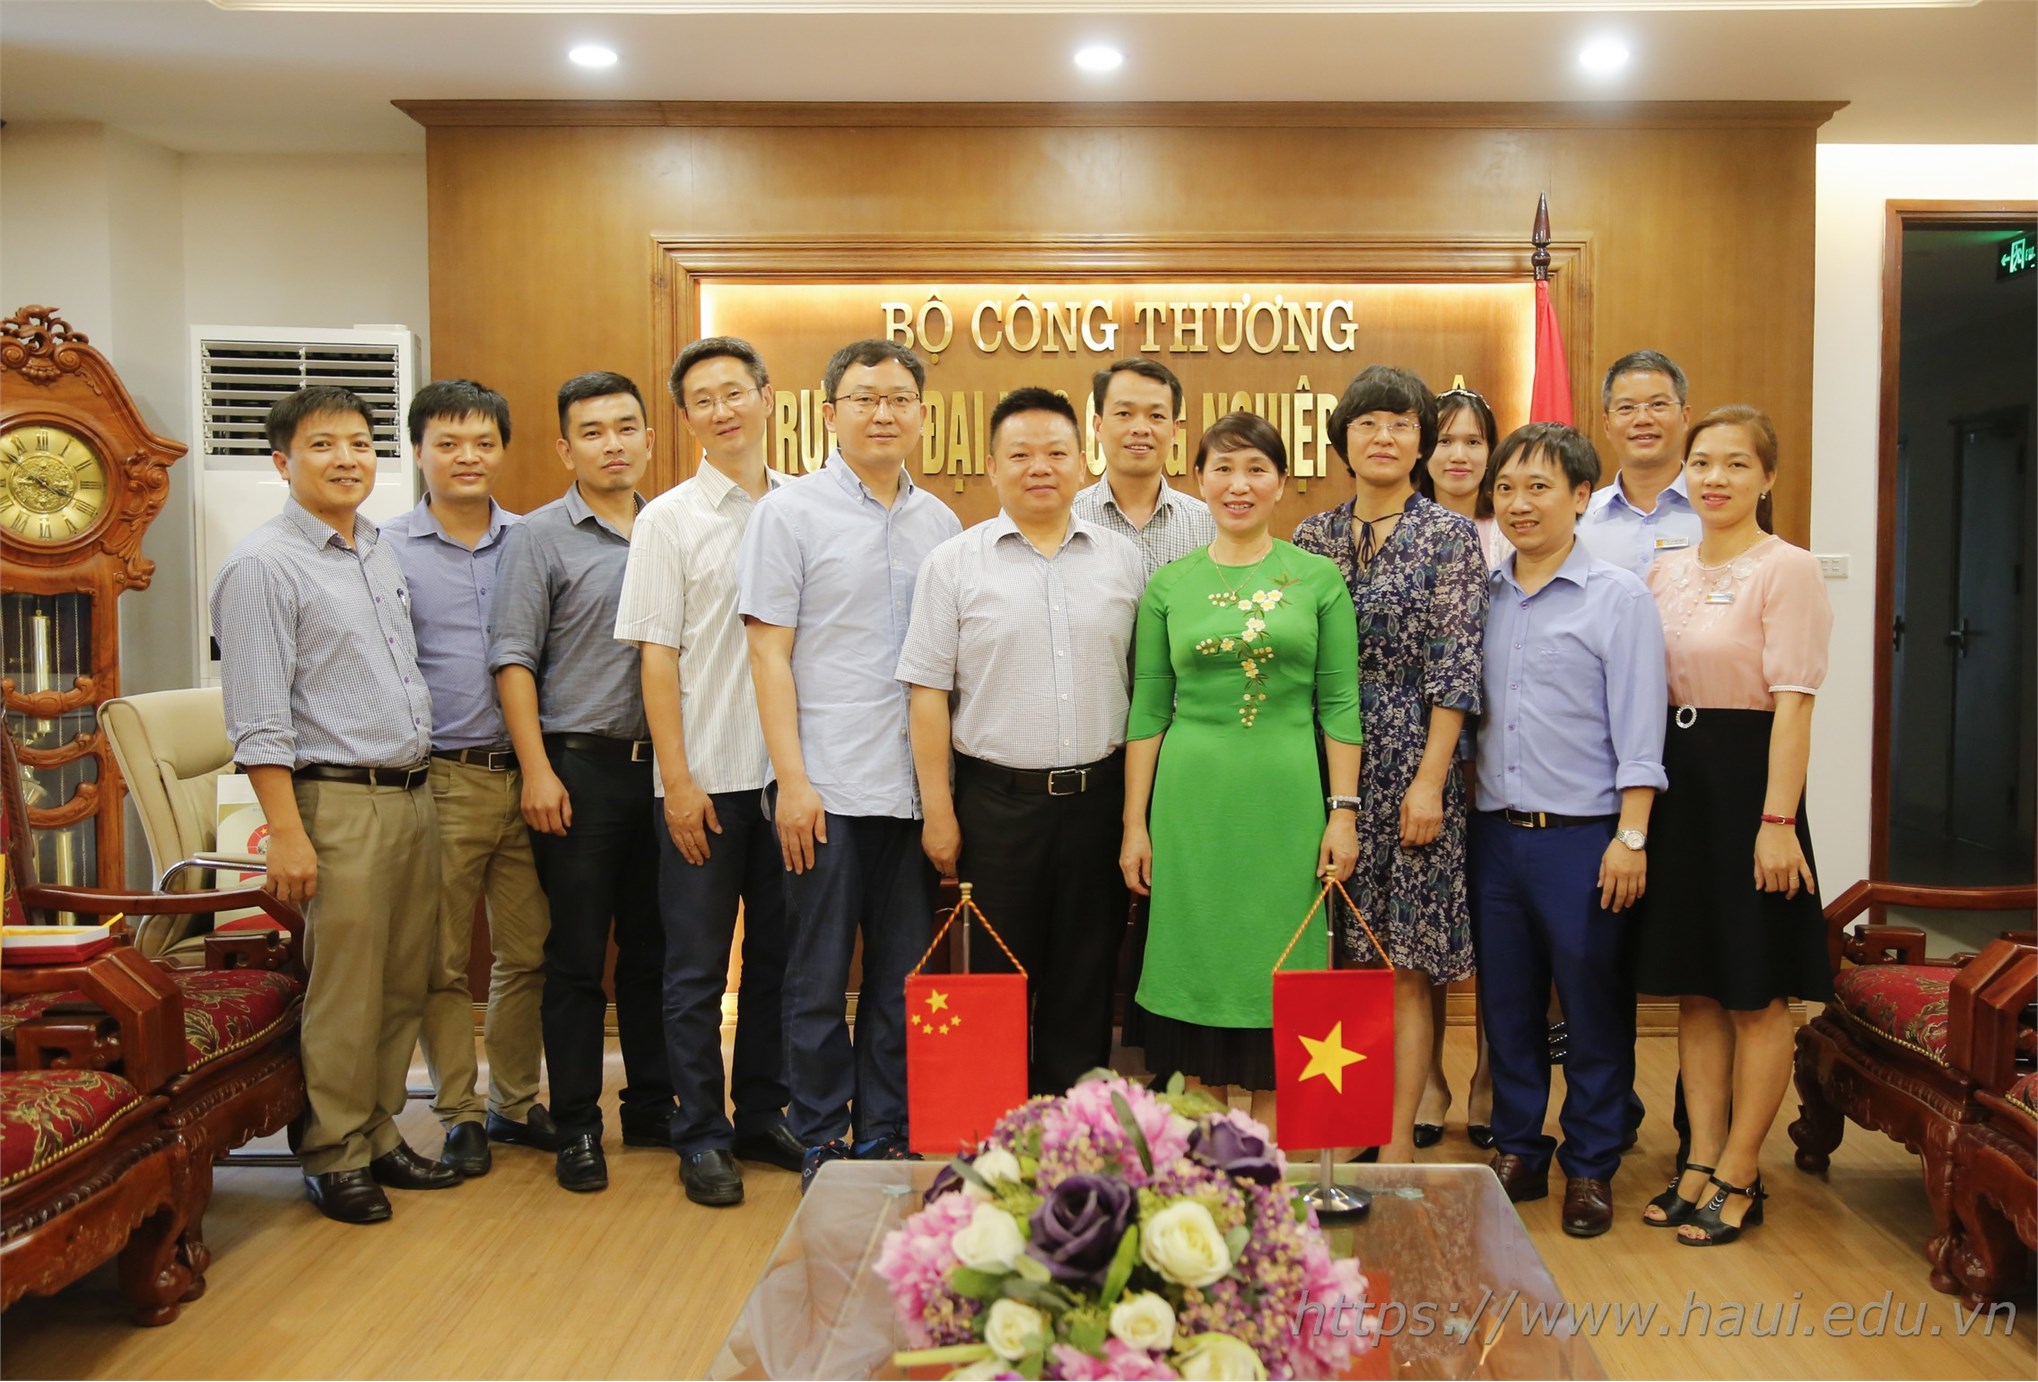 Delegation of Hunan University, China paid a working visit to Hanoi University of Industry